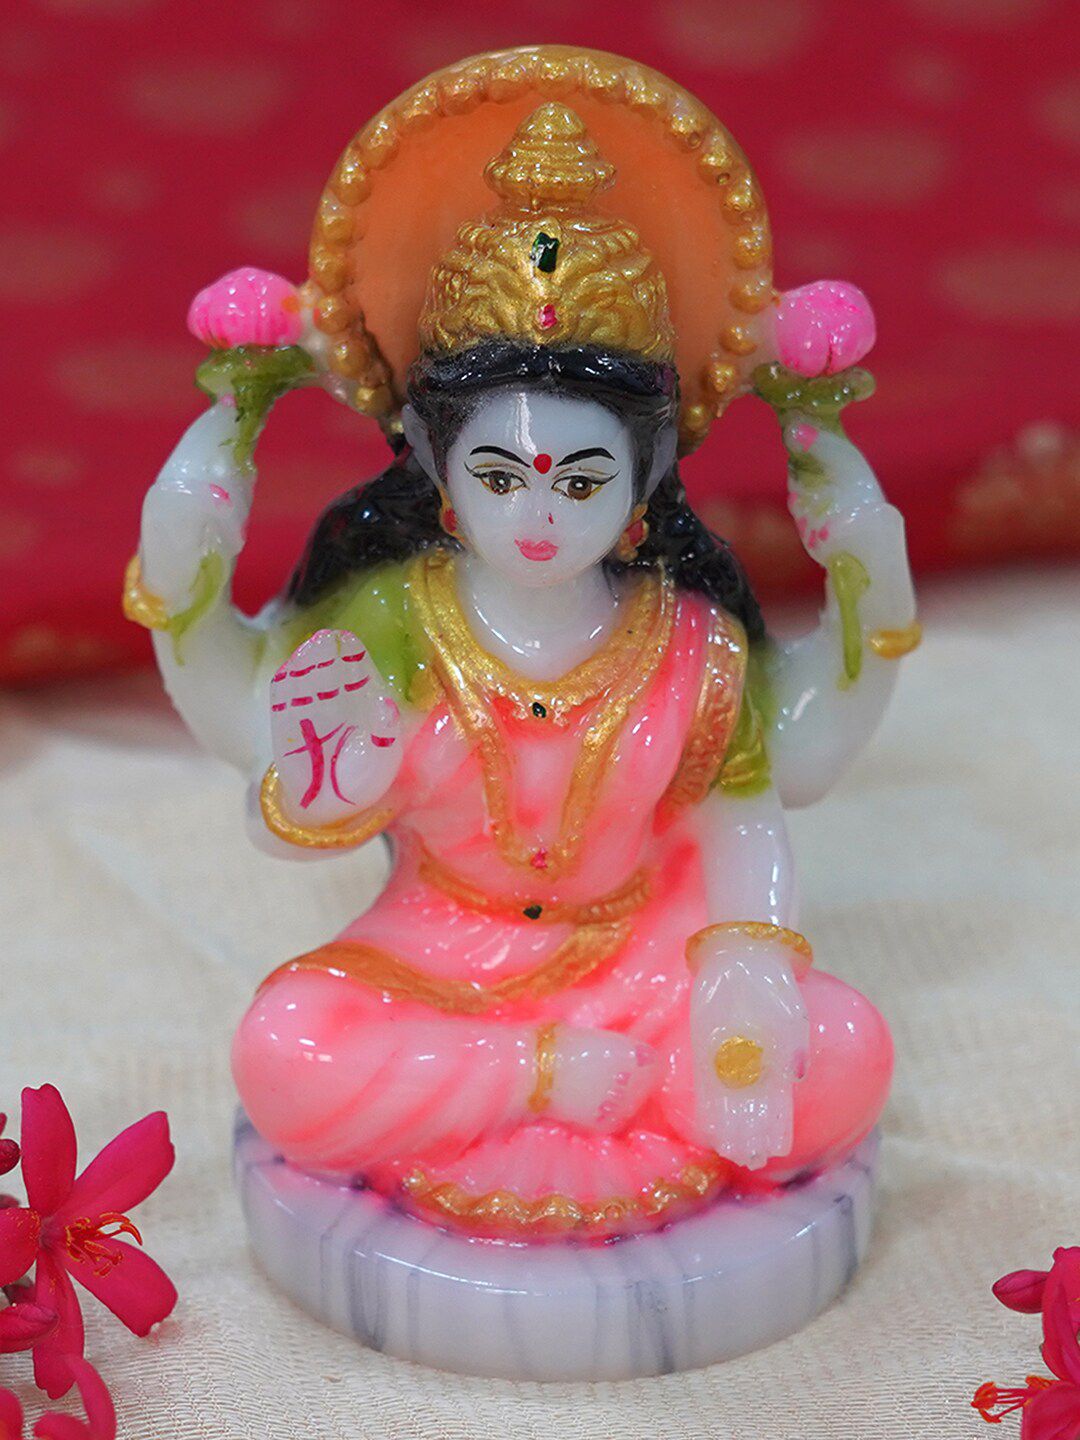 Gallery99 Pink Handpainted Lord Laxmi Idol Showpiece Price in India